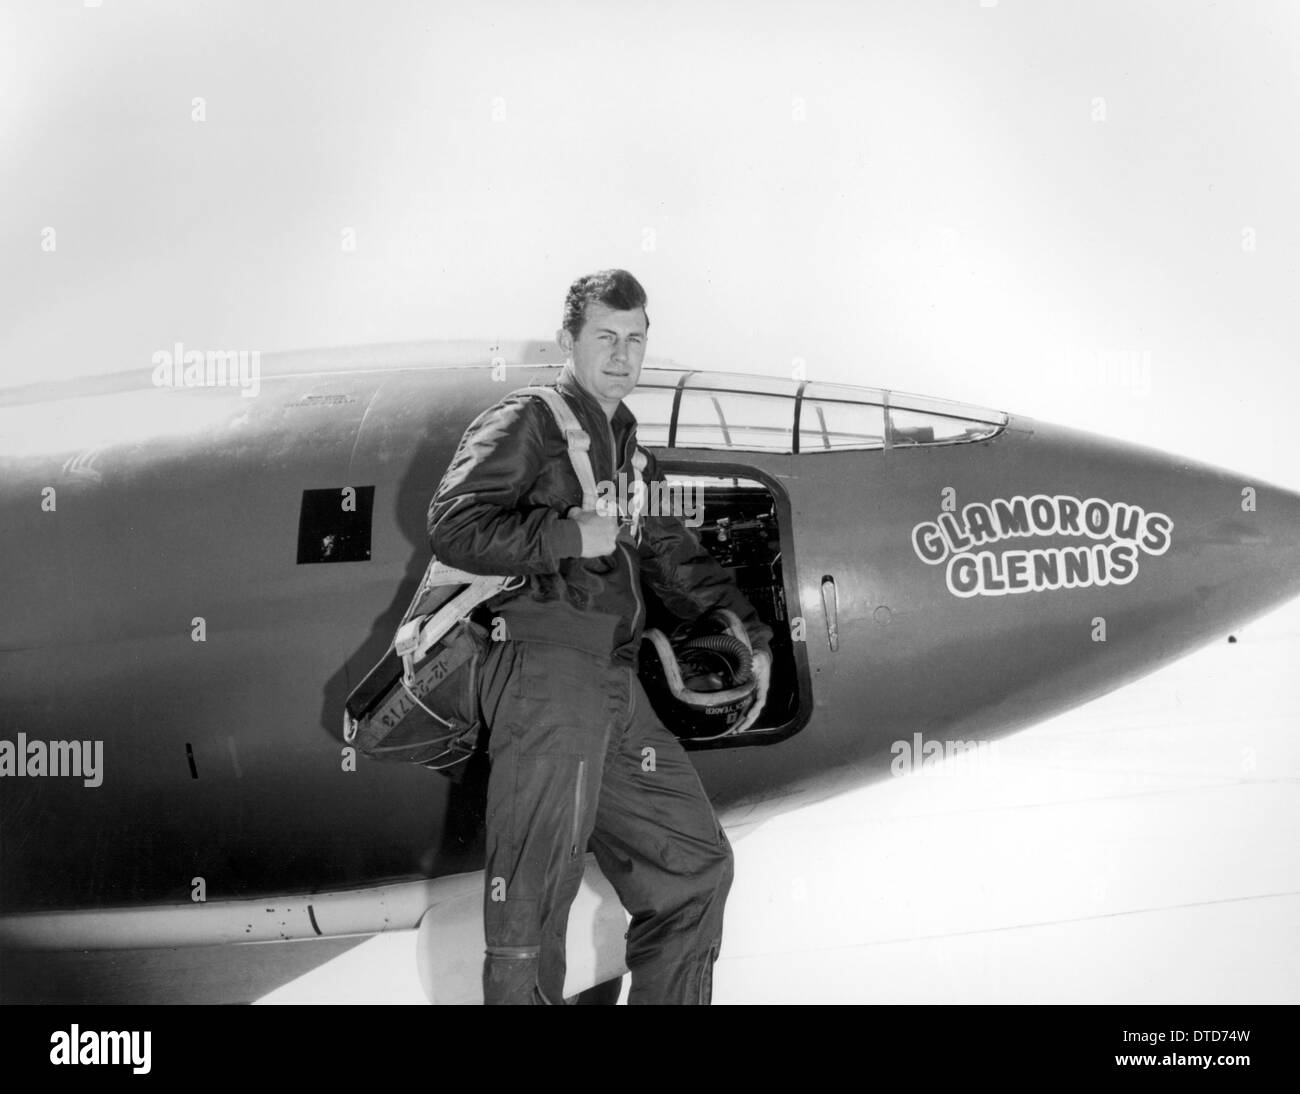 US Air Force test pilot Chuck Yeager standing in front of Glamorous Glennis the Bell X-1 aircraft that broke the sound barrier 1947 in Palmdale, California. Stock Photo